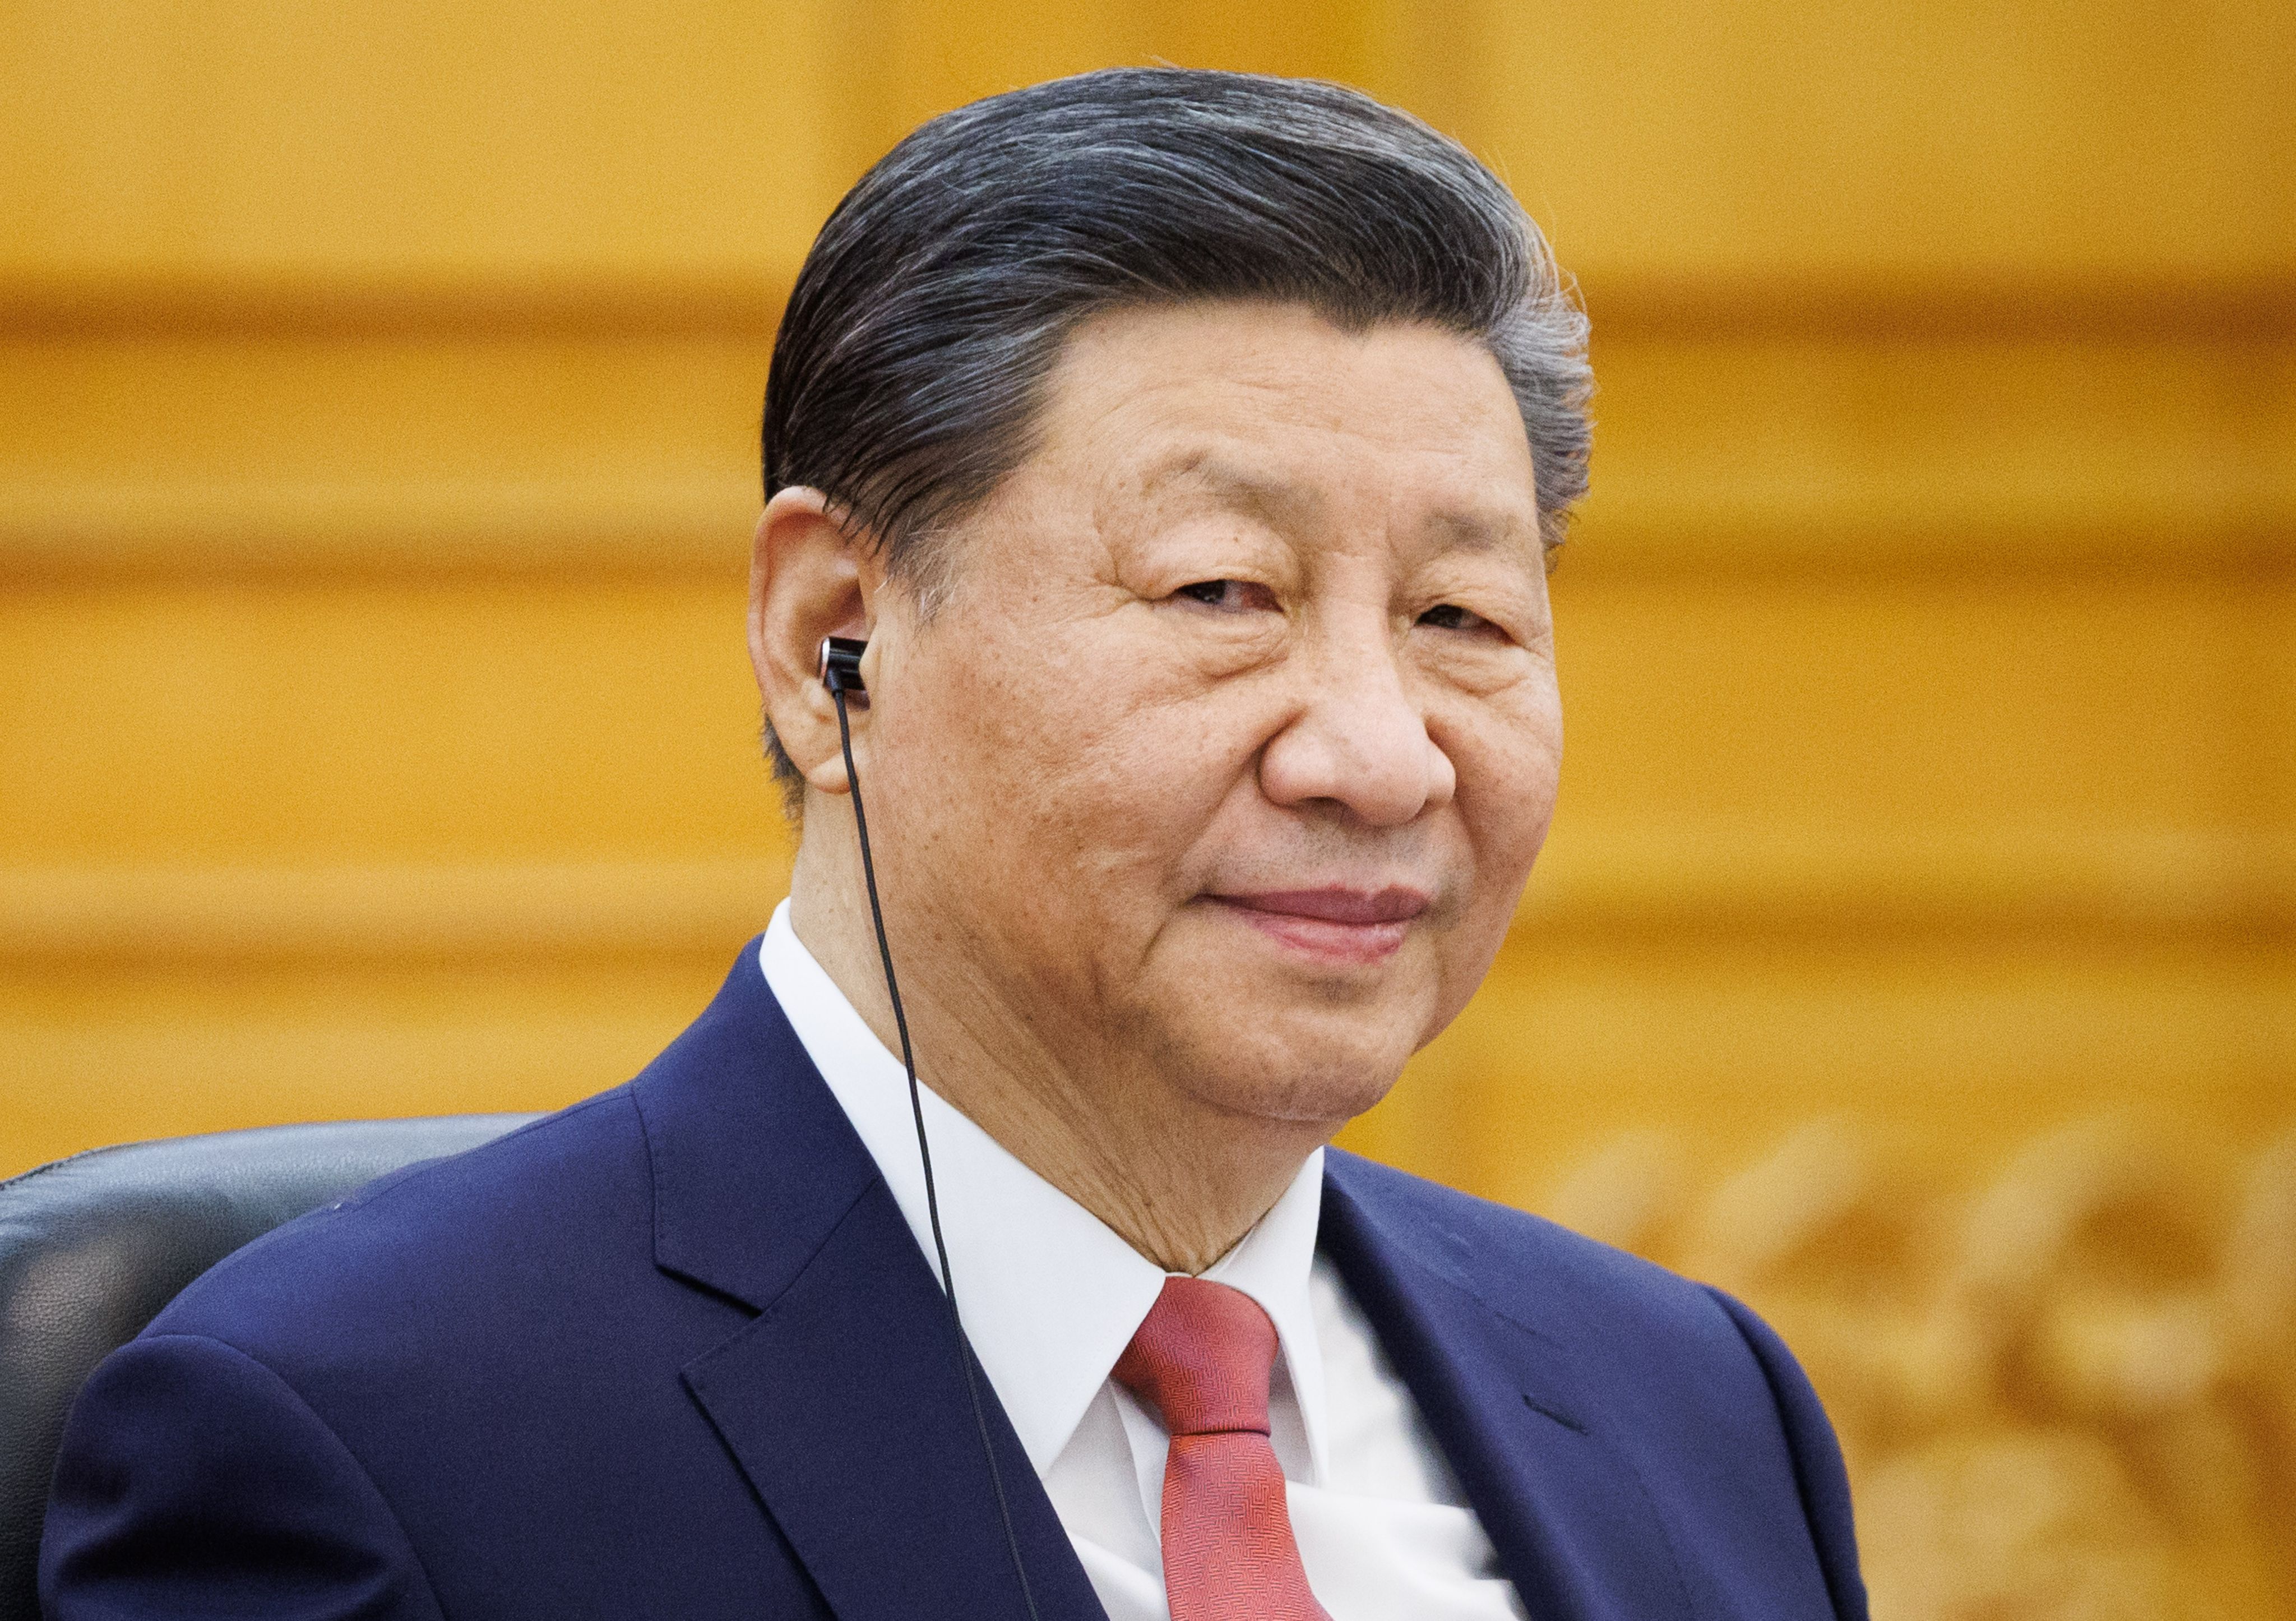 During a weekend conference, judicial and law enforcement authorities were instructed by Chinese President Xi Jinping to “resolutely safeguard national security” and “prevent and resolve major security risks”. Photo: dpa